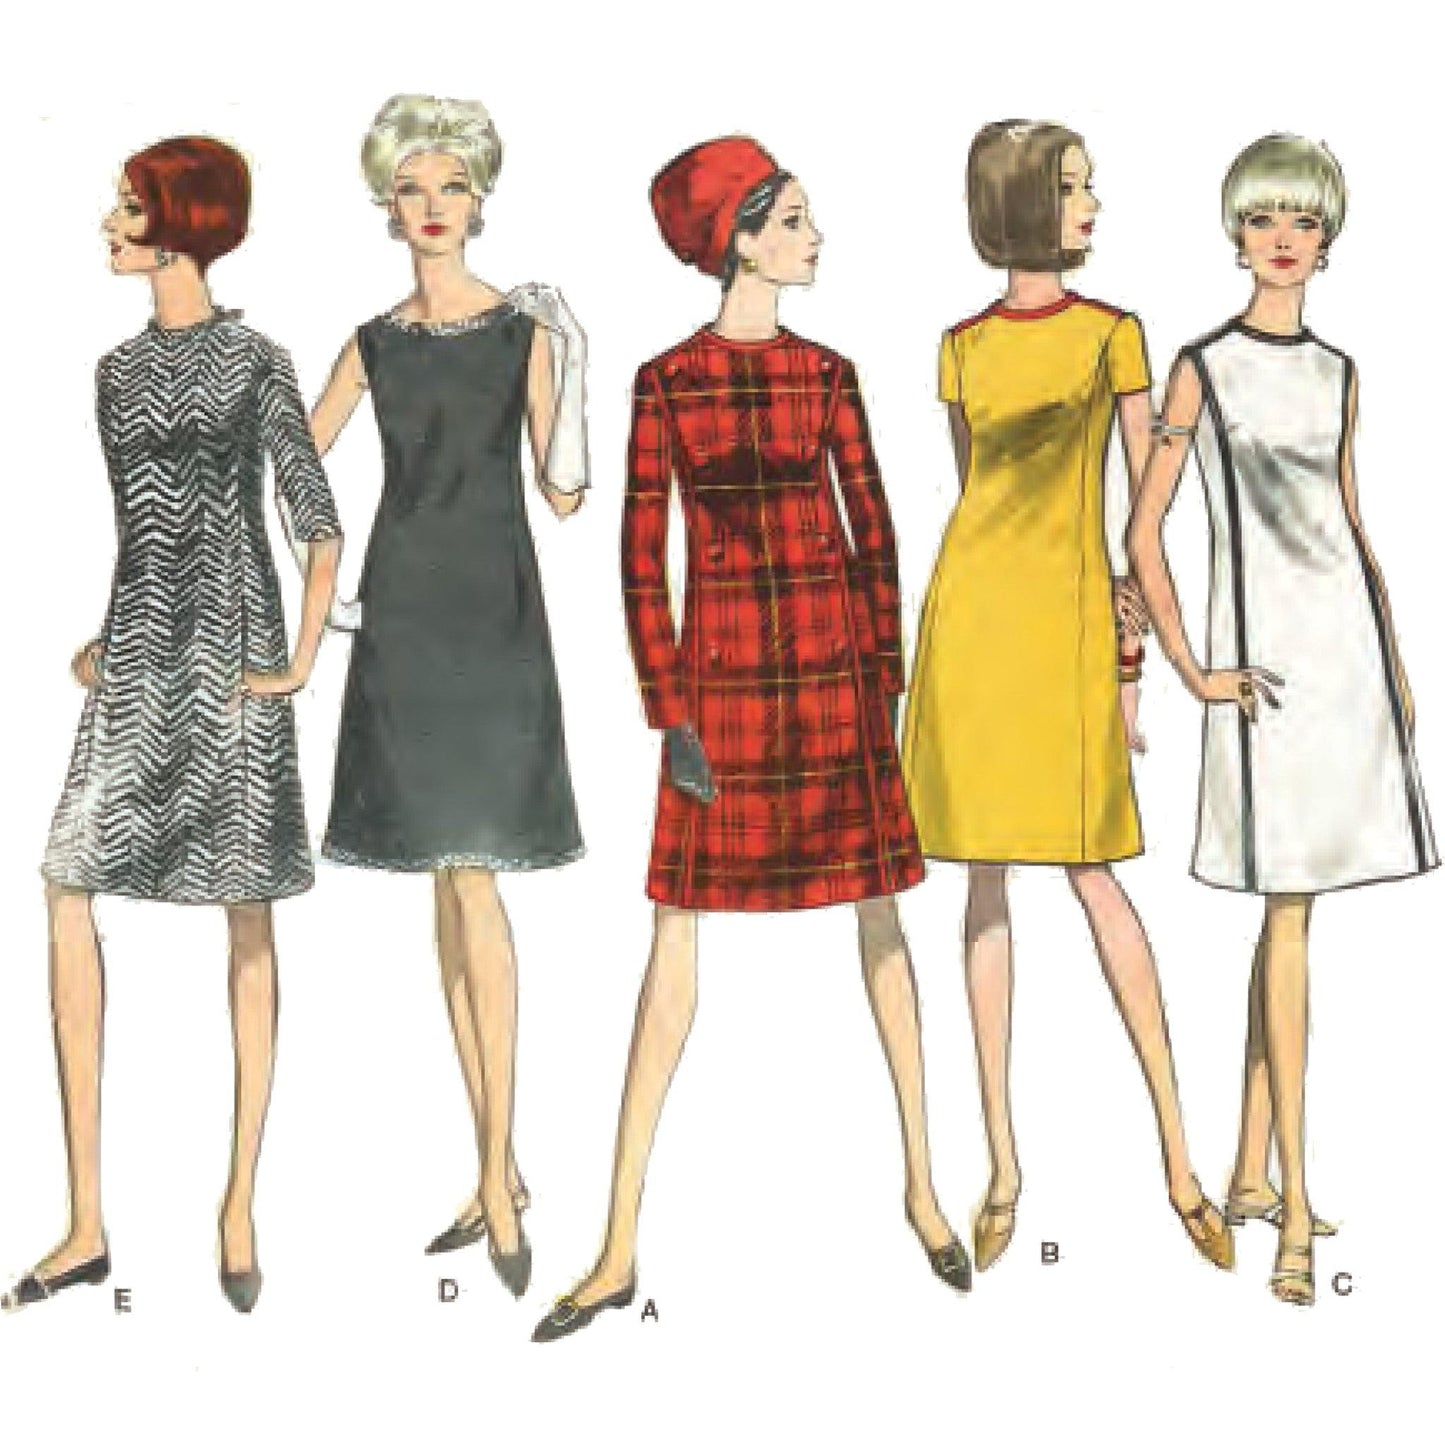 5 women wearing A-Line Mod style dresses. Left to right: Style E: Elbow length sleeves, black and white chevron pattern. Style D: Sleeveless, black. Style A: Long sleeved, red tartan. Style B: Short sleeve, yellow with red neck binding. Style C: Sleeveless with black seam piping and neck binding.